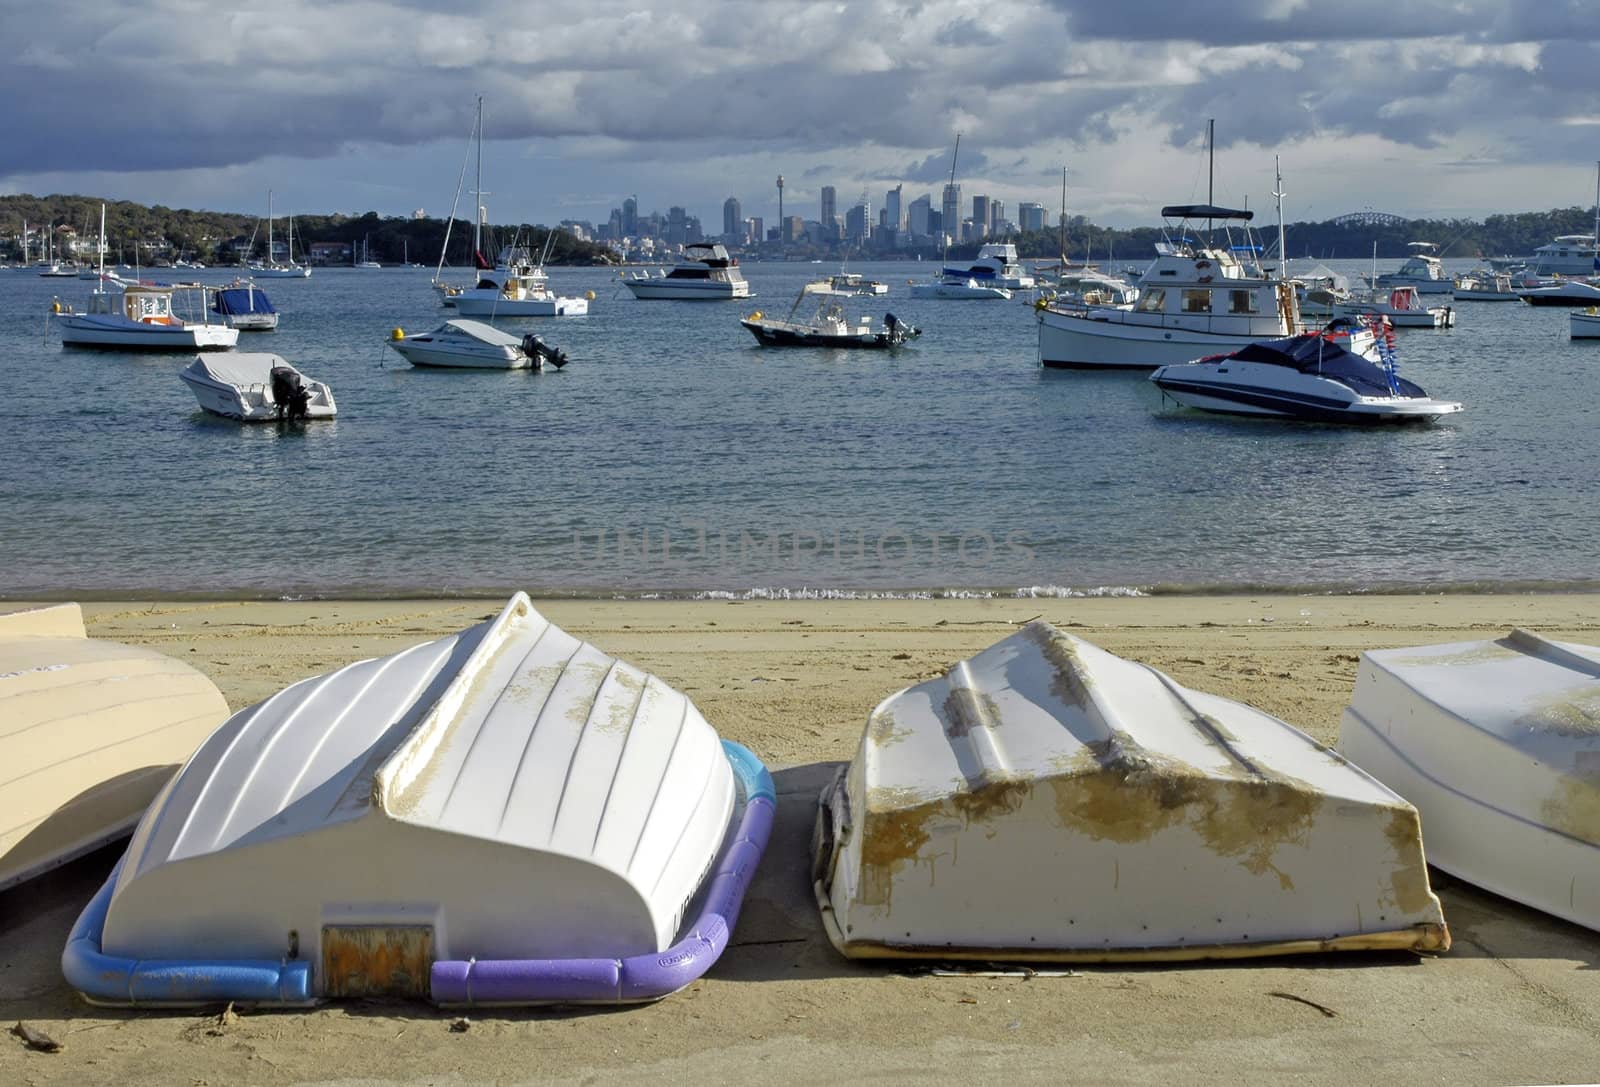 small boats on sand in foreground, motor boats in water, Sydney in distance, photo taken from Watson Bay